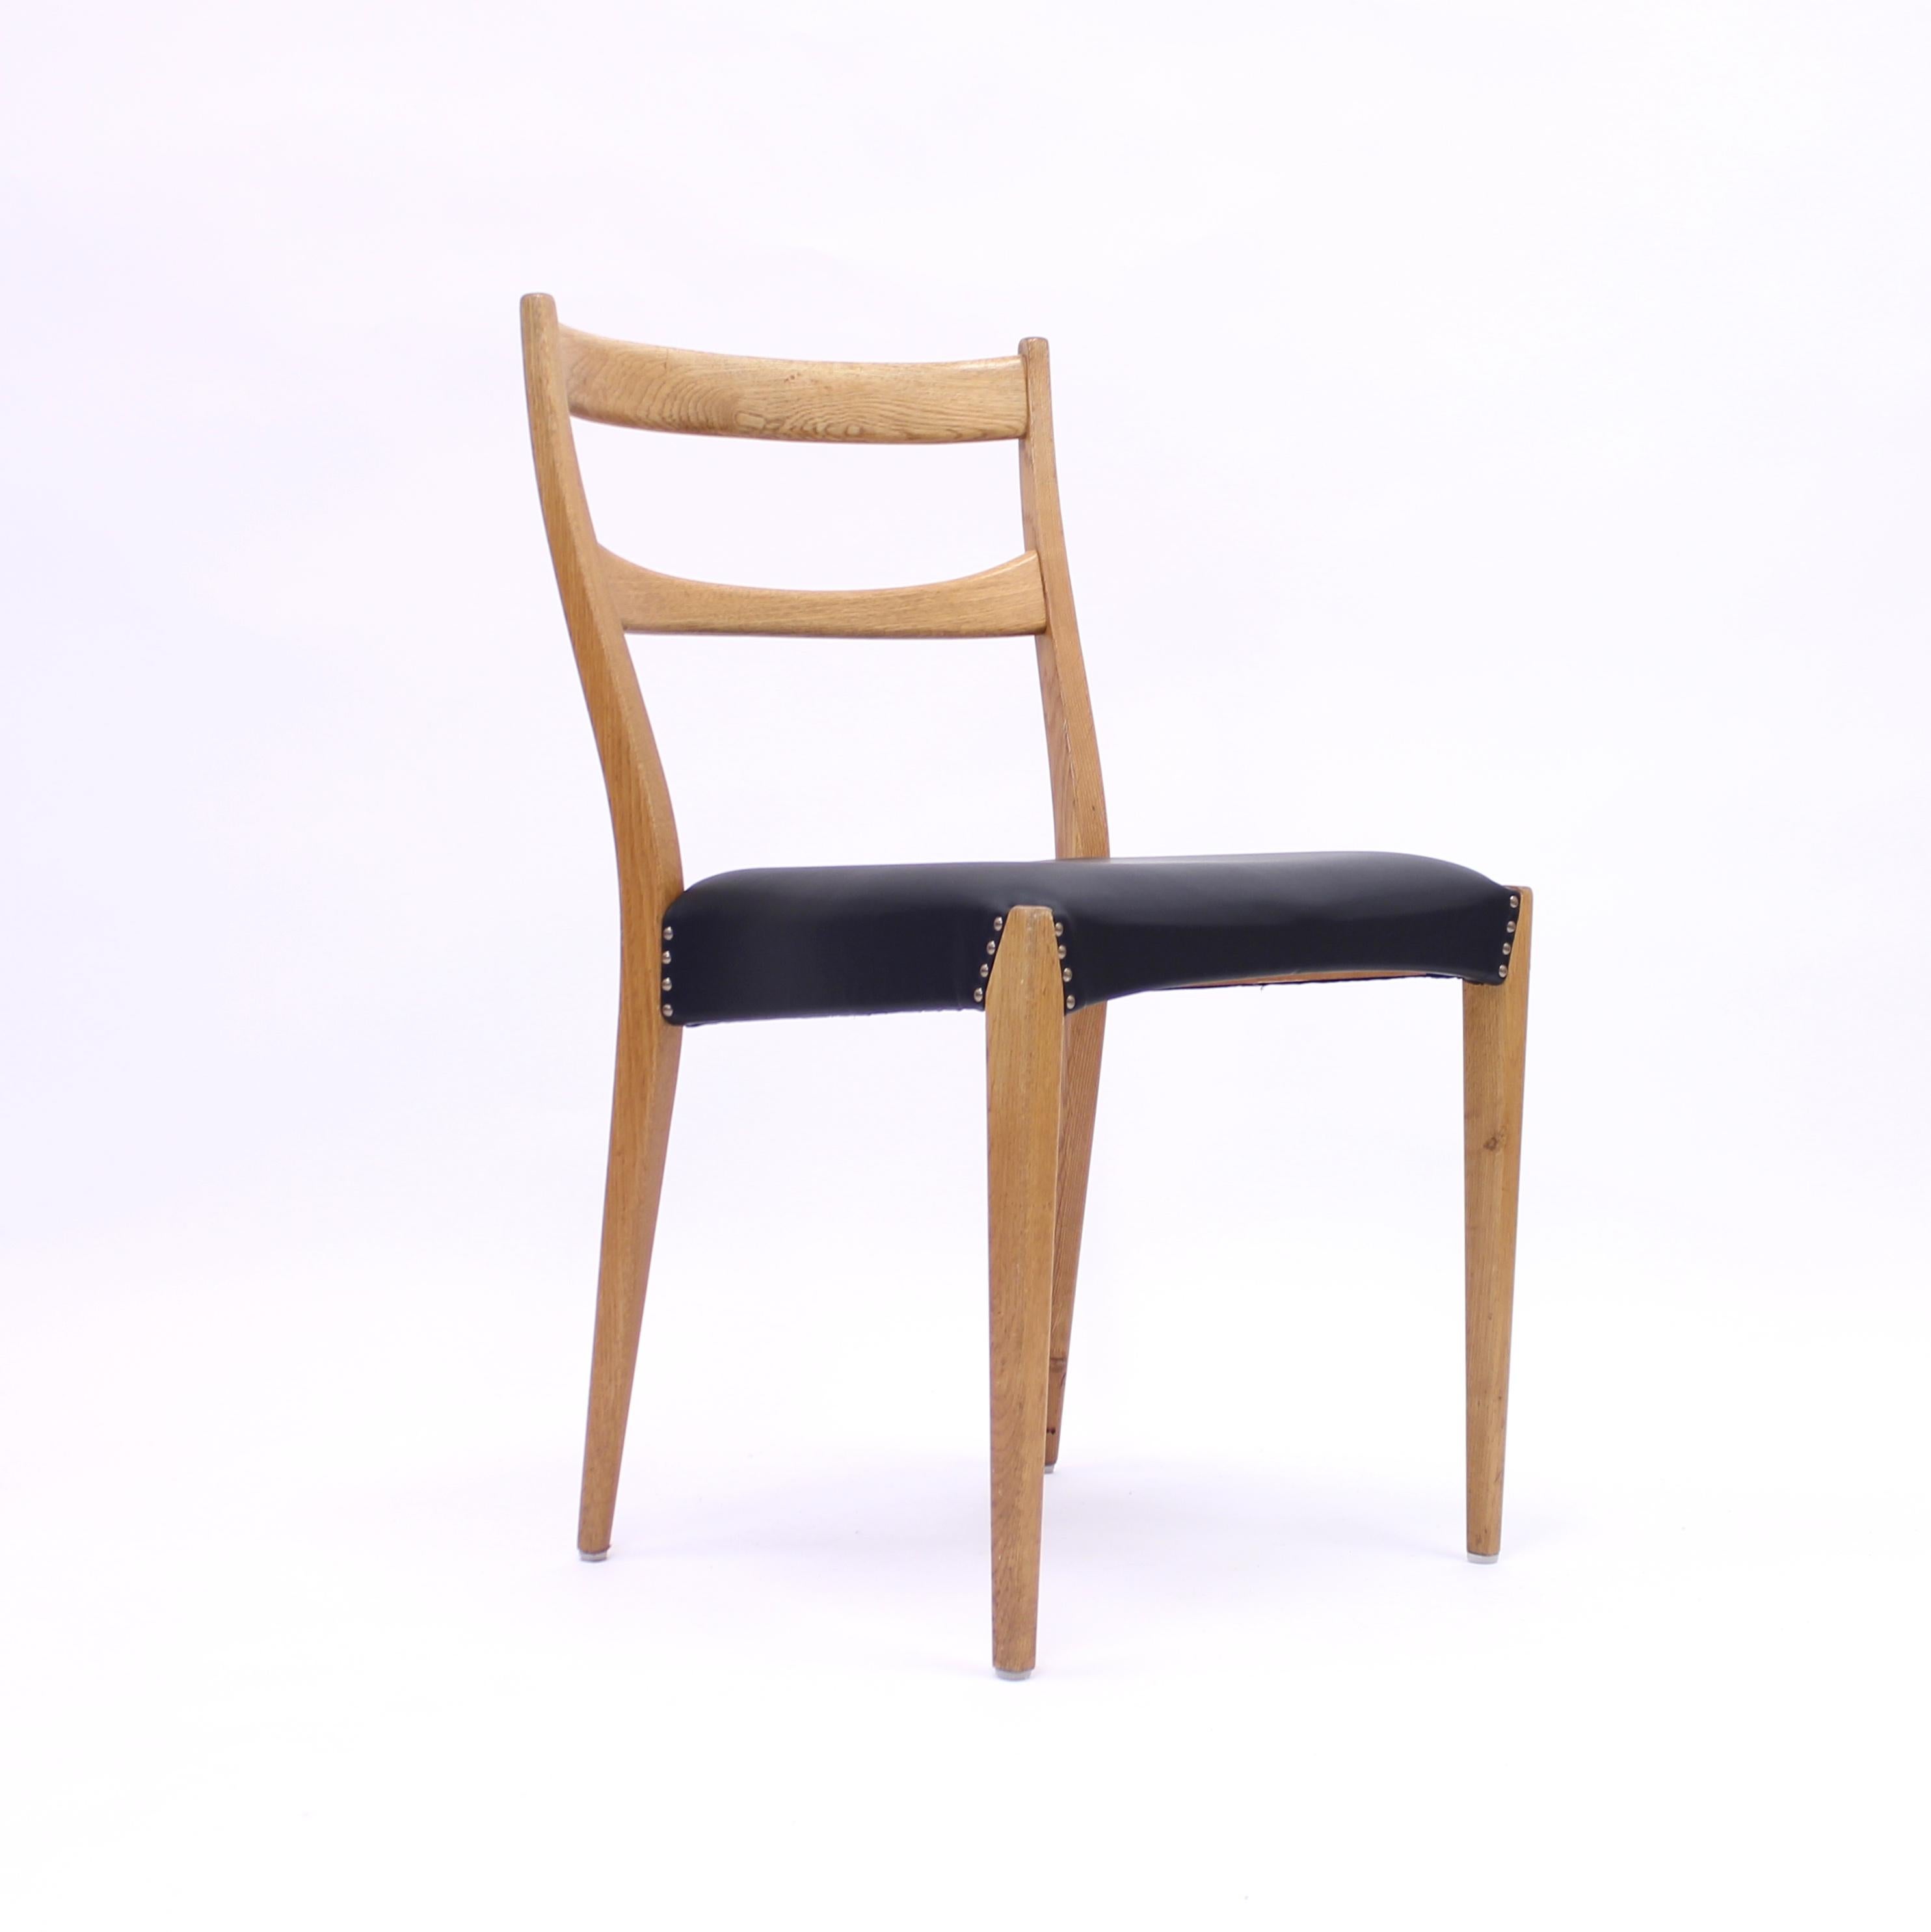 Scandinavian Oak Dining Chairs with Black Leather Seats, 1950s For Sale 3